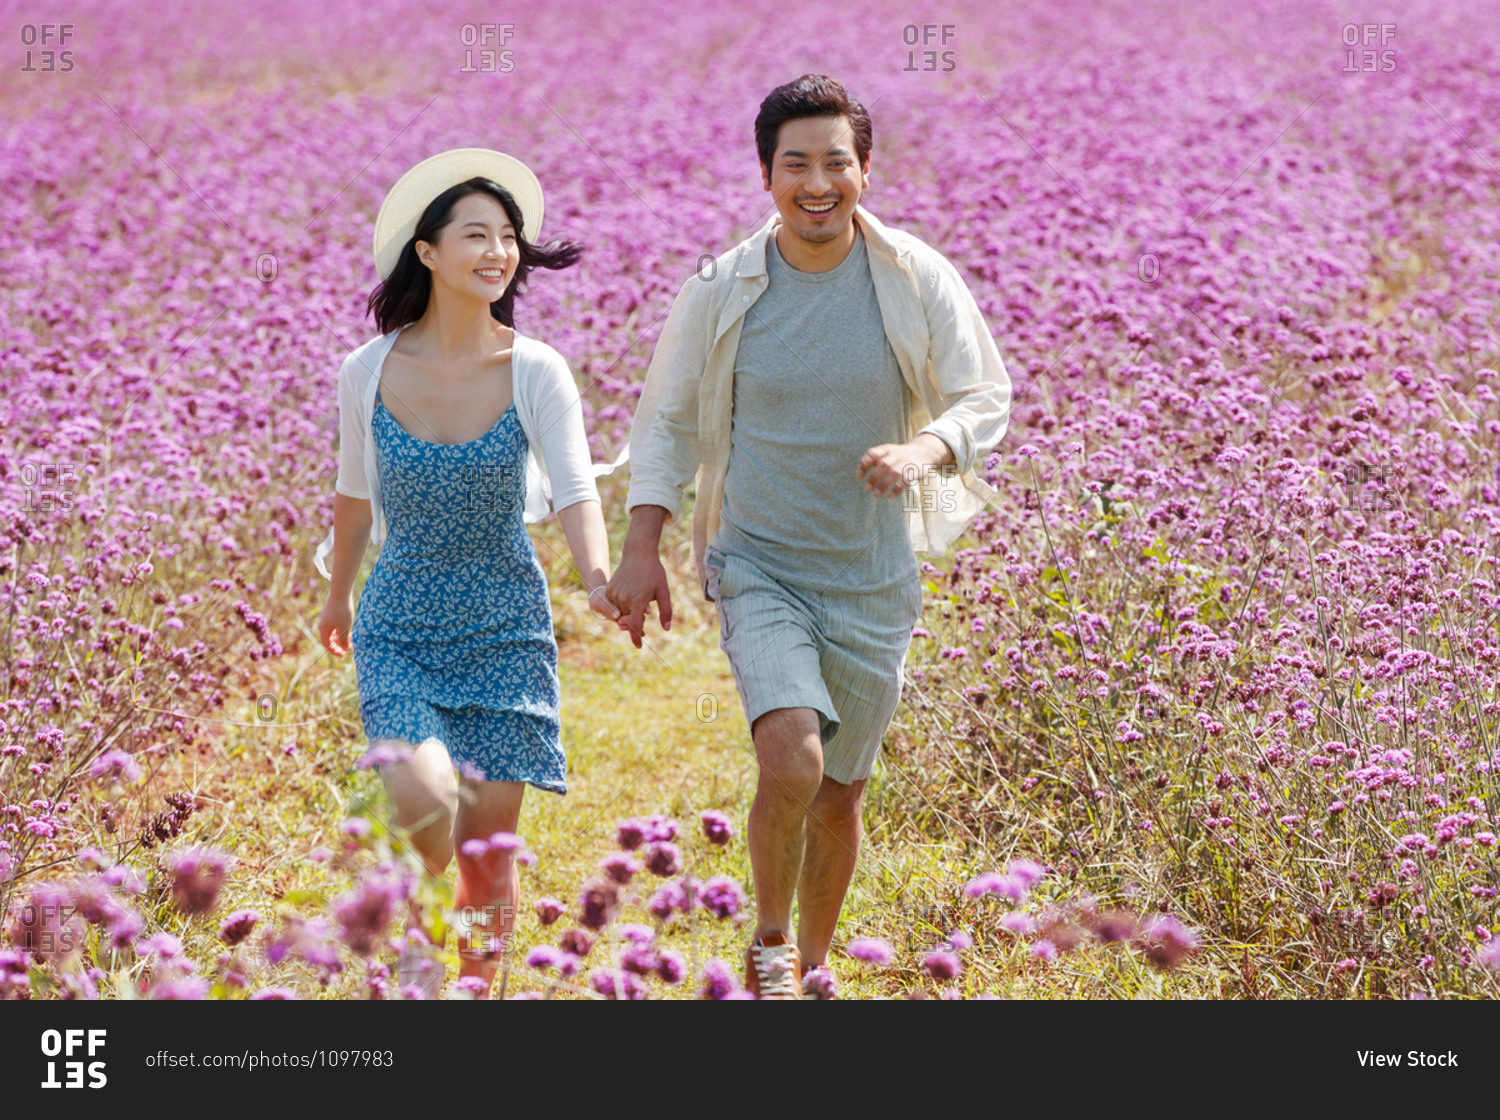 Beautiful young Asian couple running hand in hand in a filed filled with purple flowers